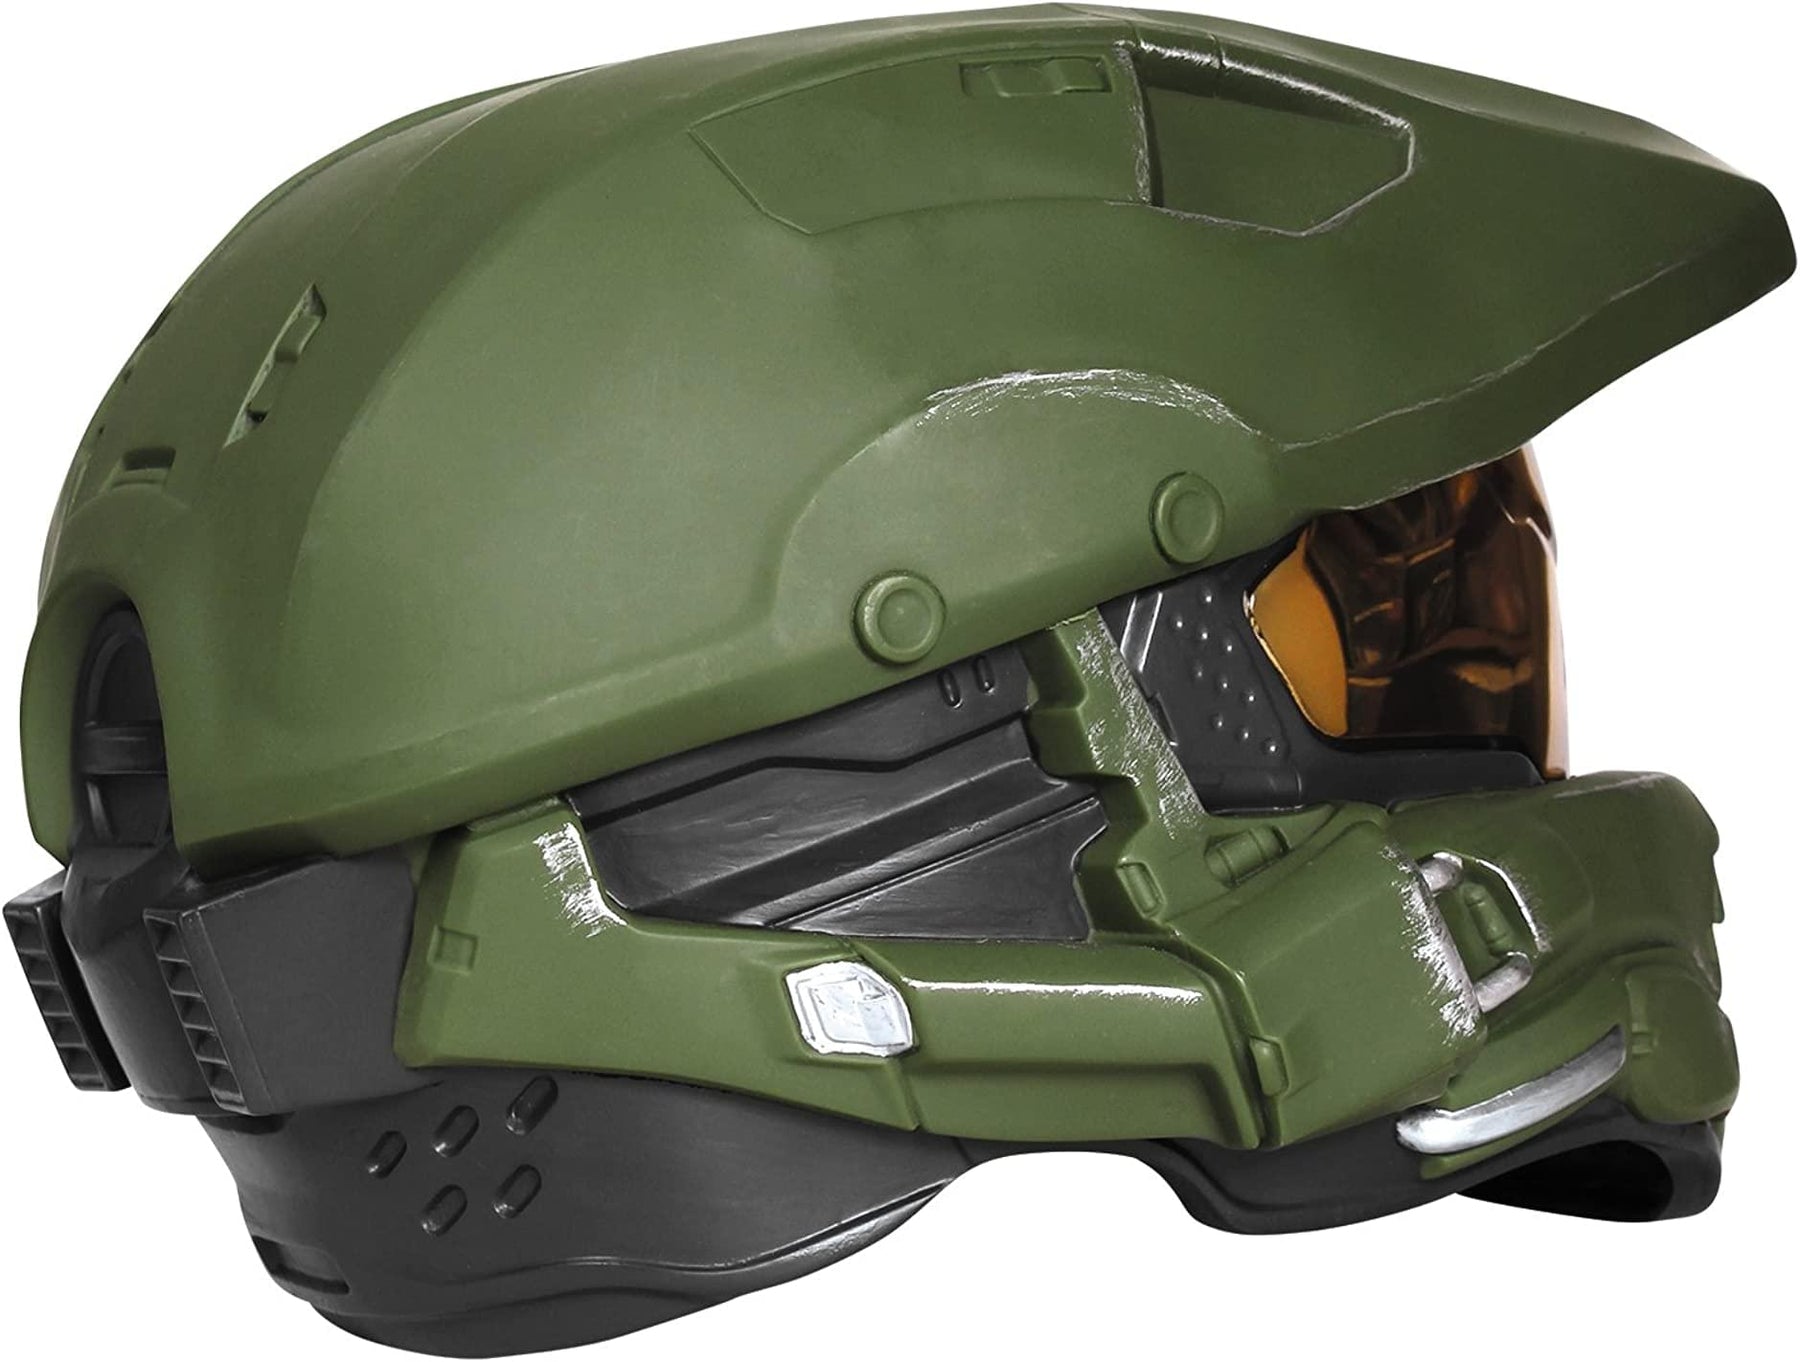 Master Chief Adult Lightup Costume Mask